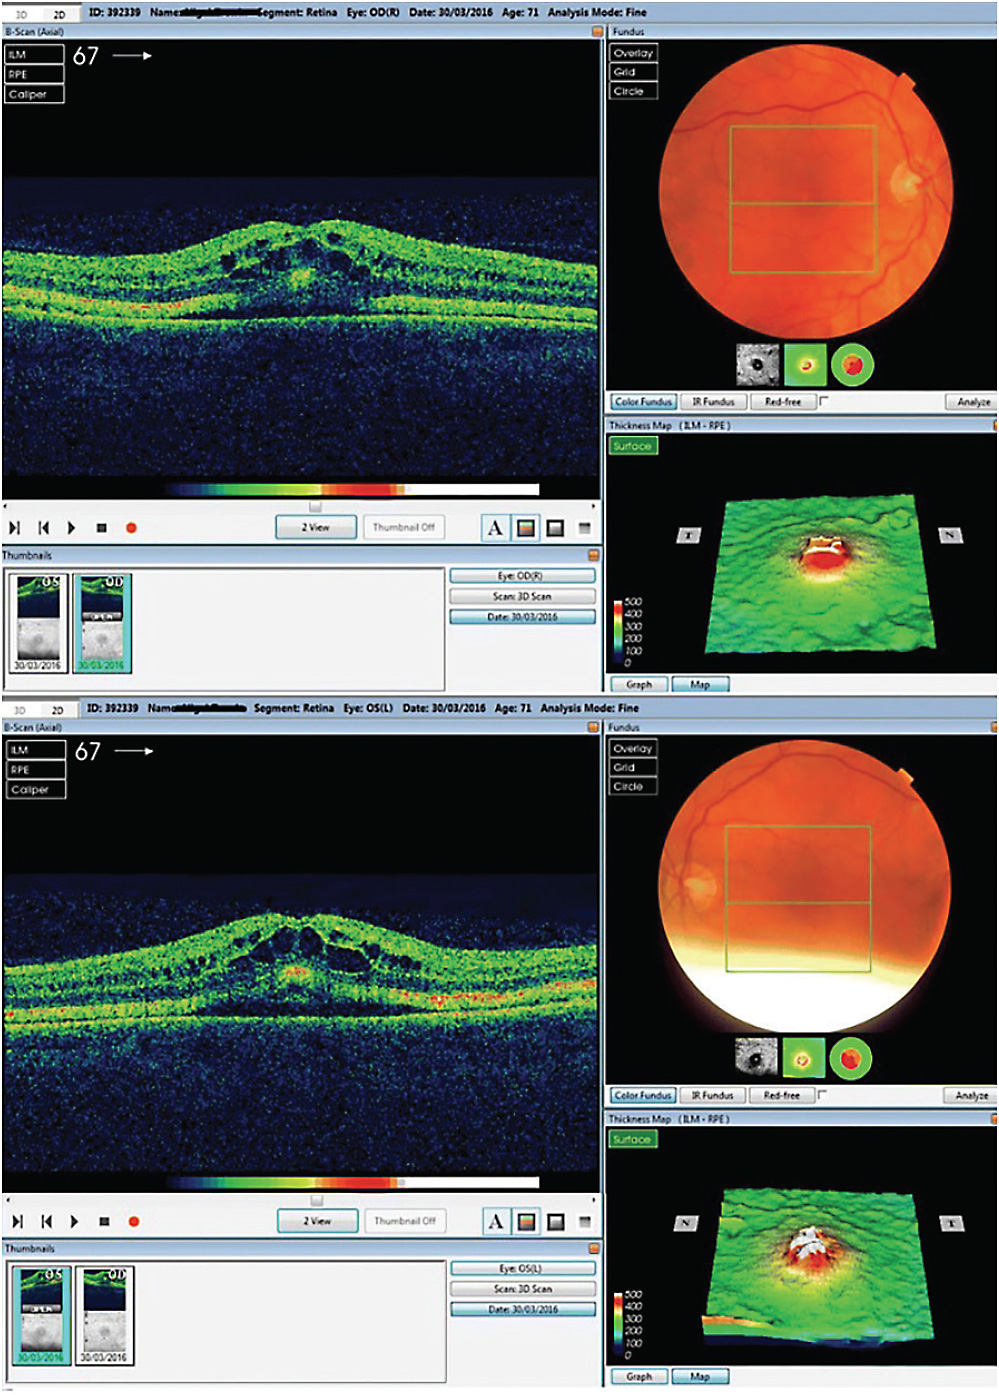 FIGURE 1. Optical coherence tomography (OCT) scan of a 71-year-old patient with melanoma, who had been treated for 4 months with trametinib, a MEK inhibitor. The imaging revealed intraretinal and subretinal fluid on macula with cystoid changes in the perifoveal area in both eyes, with significant thickening of the ellipsoid zone and subretinal granular deposits overlying an apparently intact retinal pigment epithelium (RPE). After cessation of trametinib, the cystoid macular edema resolved over a 6-month period. IMAGE ORIGINALLY PUBLISHED IN: TYAGI P, SANTIAGO C. NEW FEATURES IN MEK RETINOPATHY. BMC OPHTHALMOL. 2018;18(SUPPL 1):221. DOI:10.1186/S12886-018-0861-8. REPRINTED WITH PERMISSION UNDER HTTPS://CREATIVECOMMONS.ORG/LICENSES/BY/4.0/